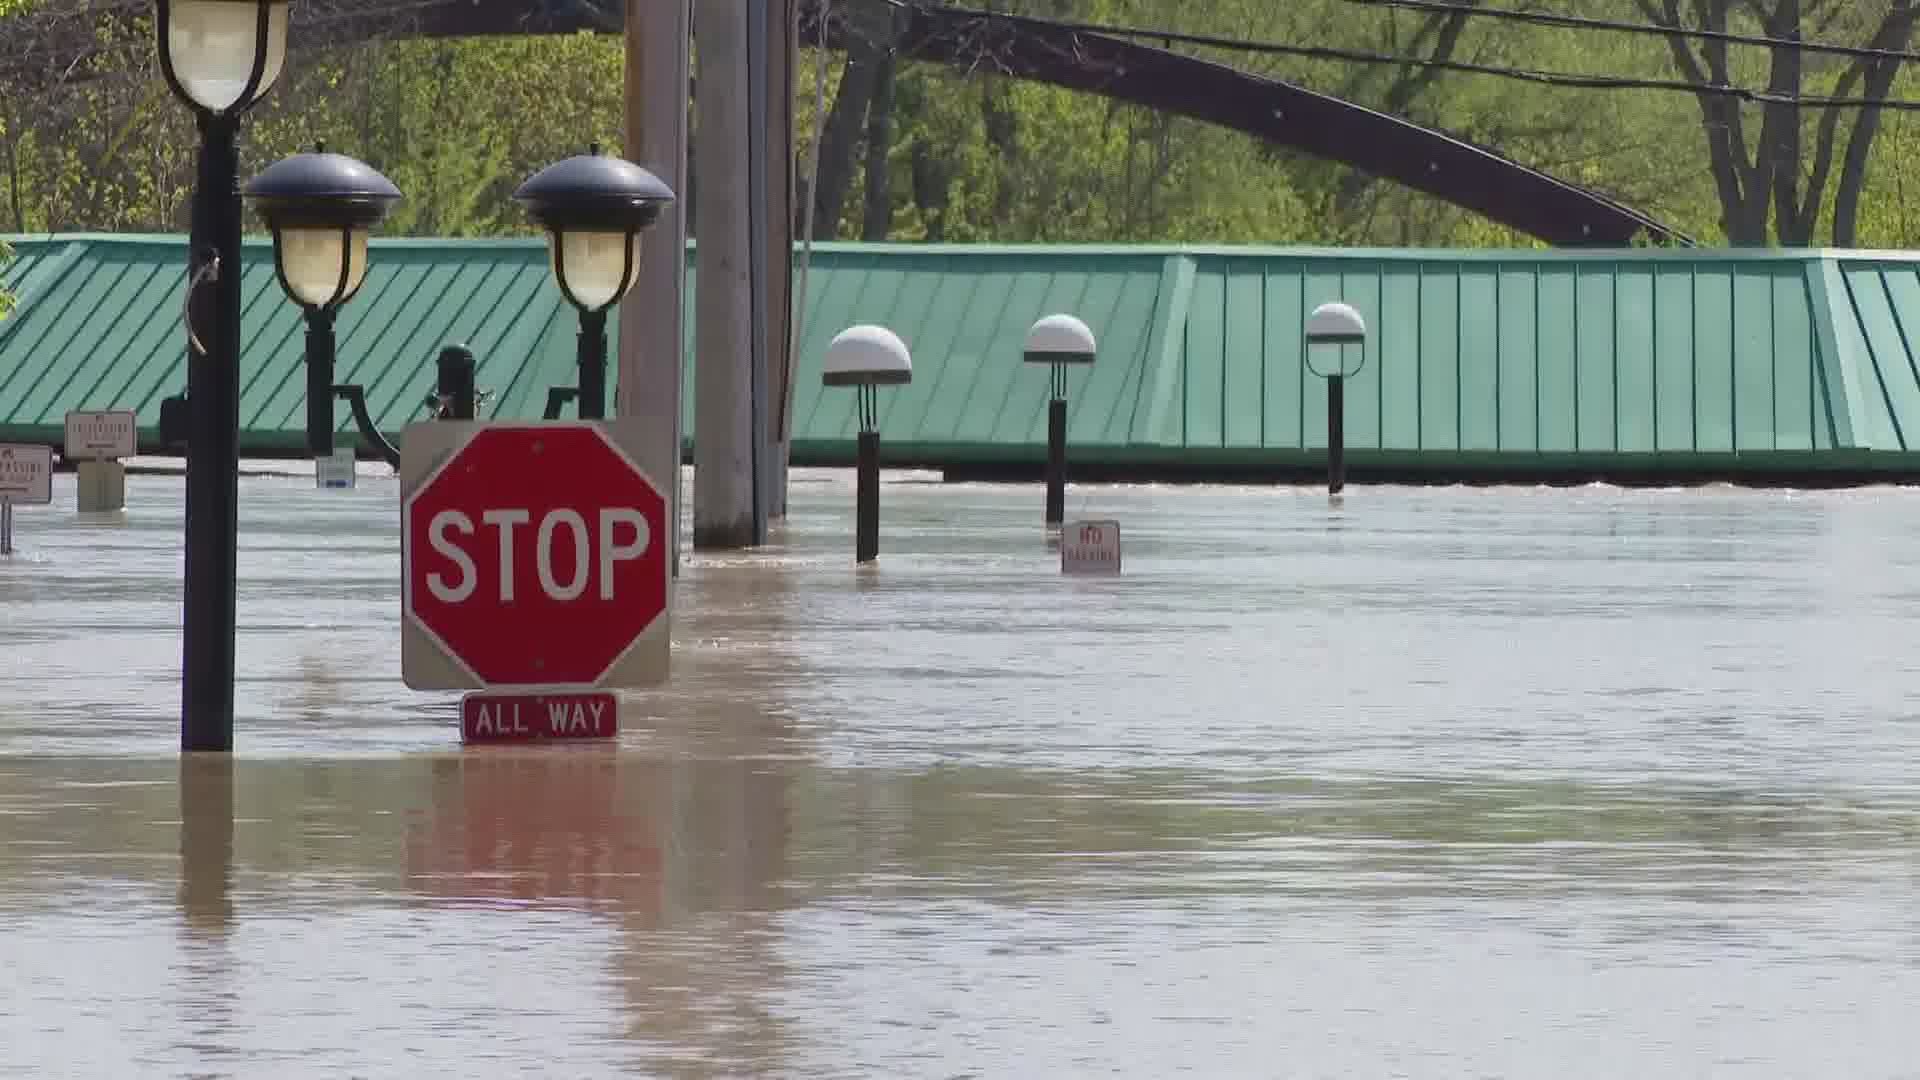 Thousands of people are displaced after two dams were breached Tuesday night, flooding Midland.